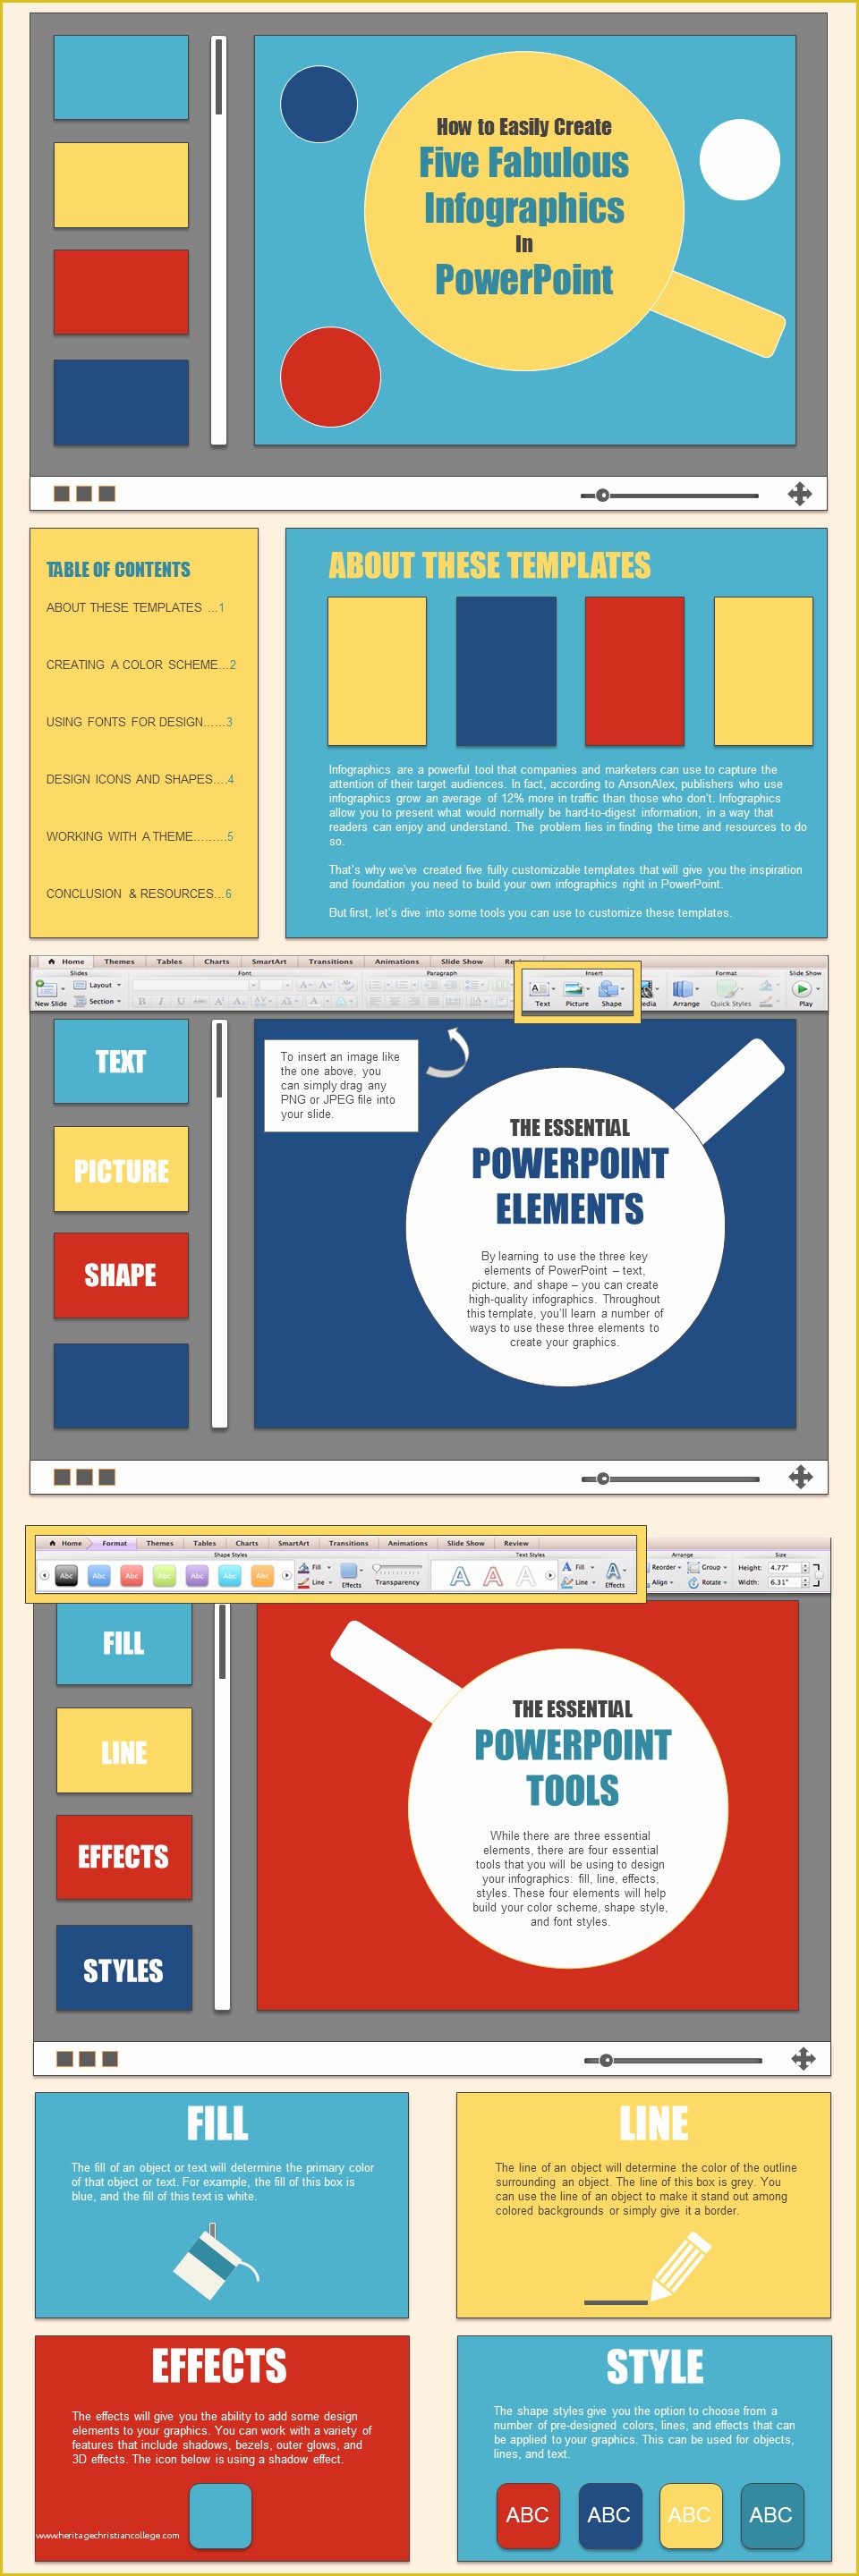 Infographic Template Powerpoint Free Of 5 Infographics to Teach You How to Easily Make